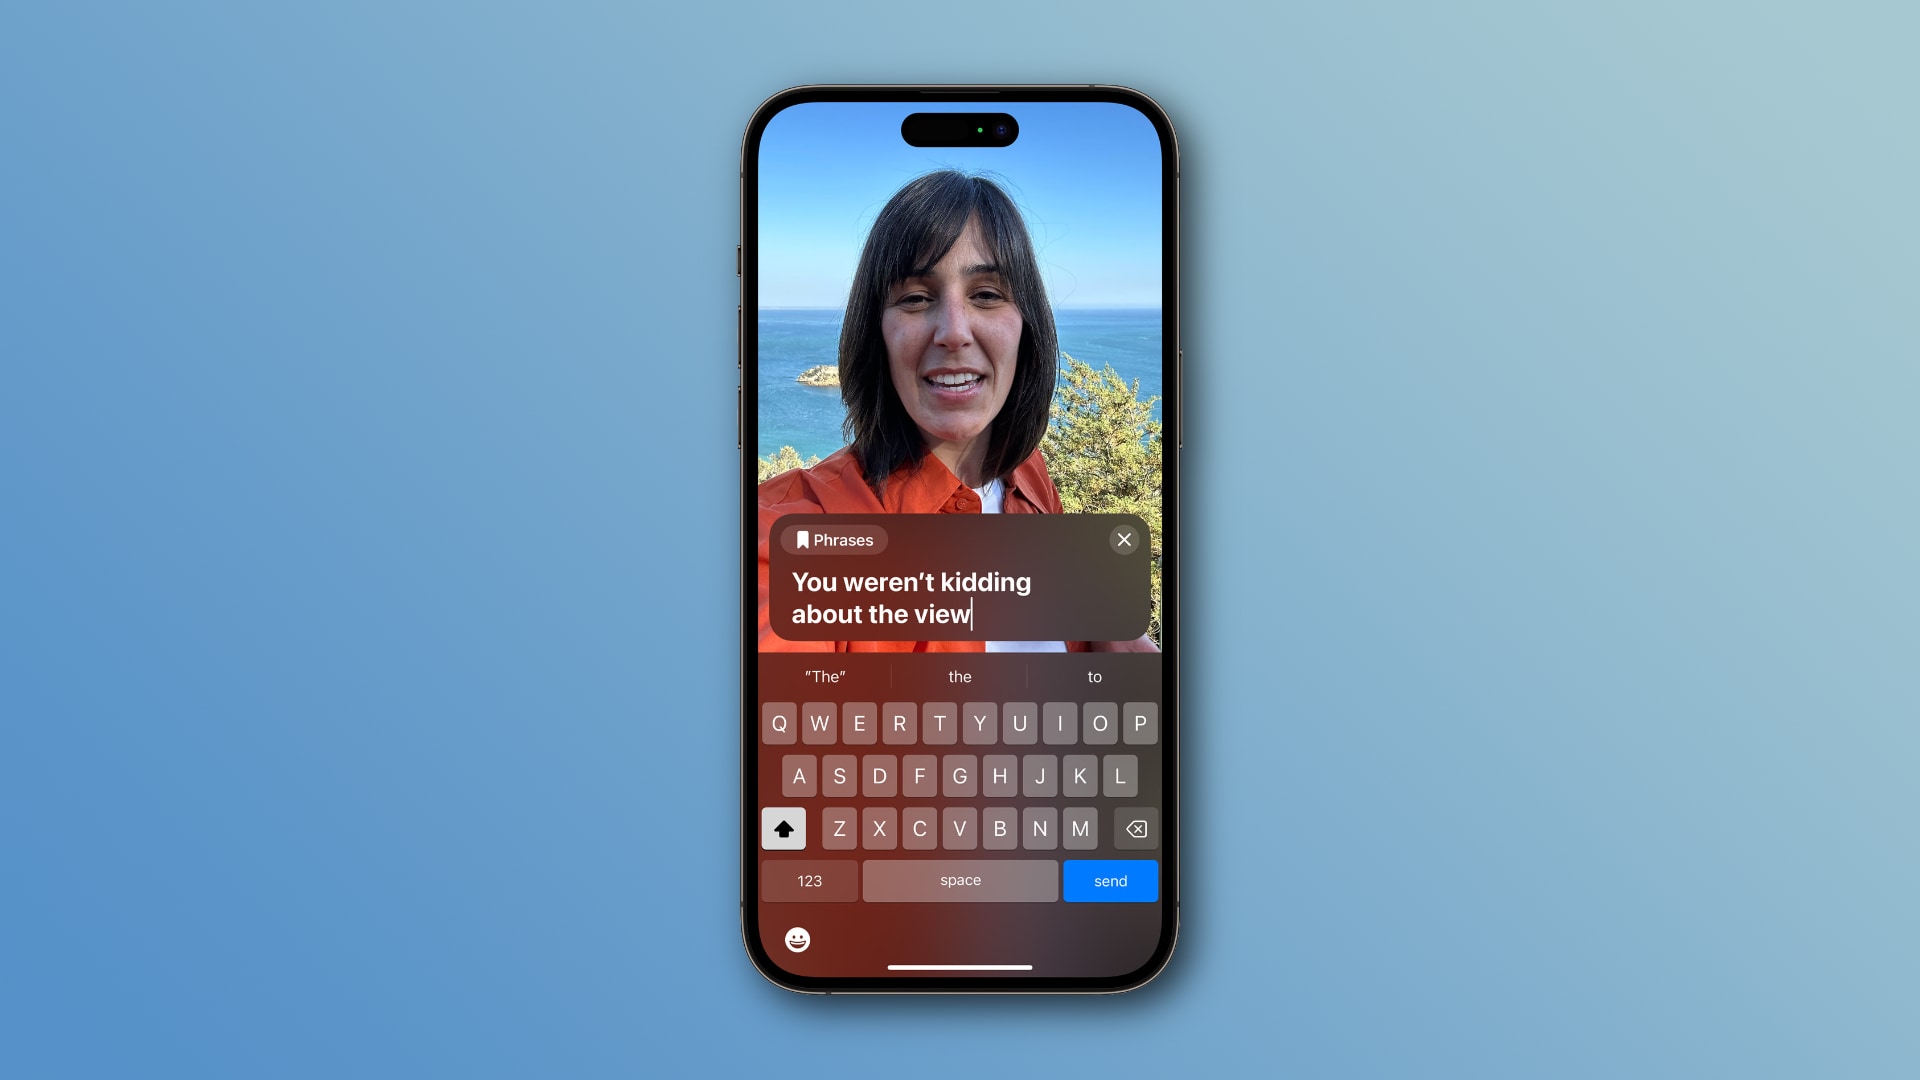 Apple's Live Speech accessibility feature shown in action during a FaceTime call on iPhone